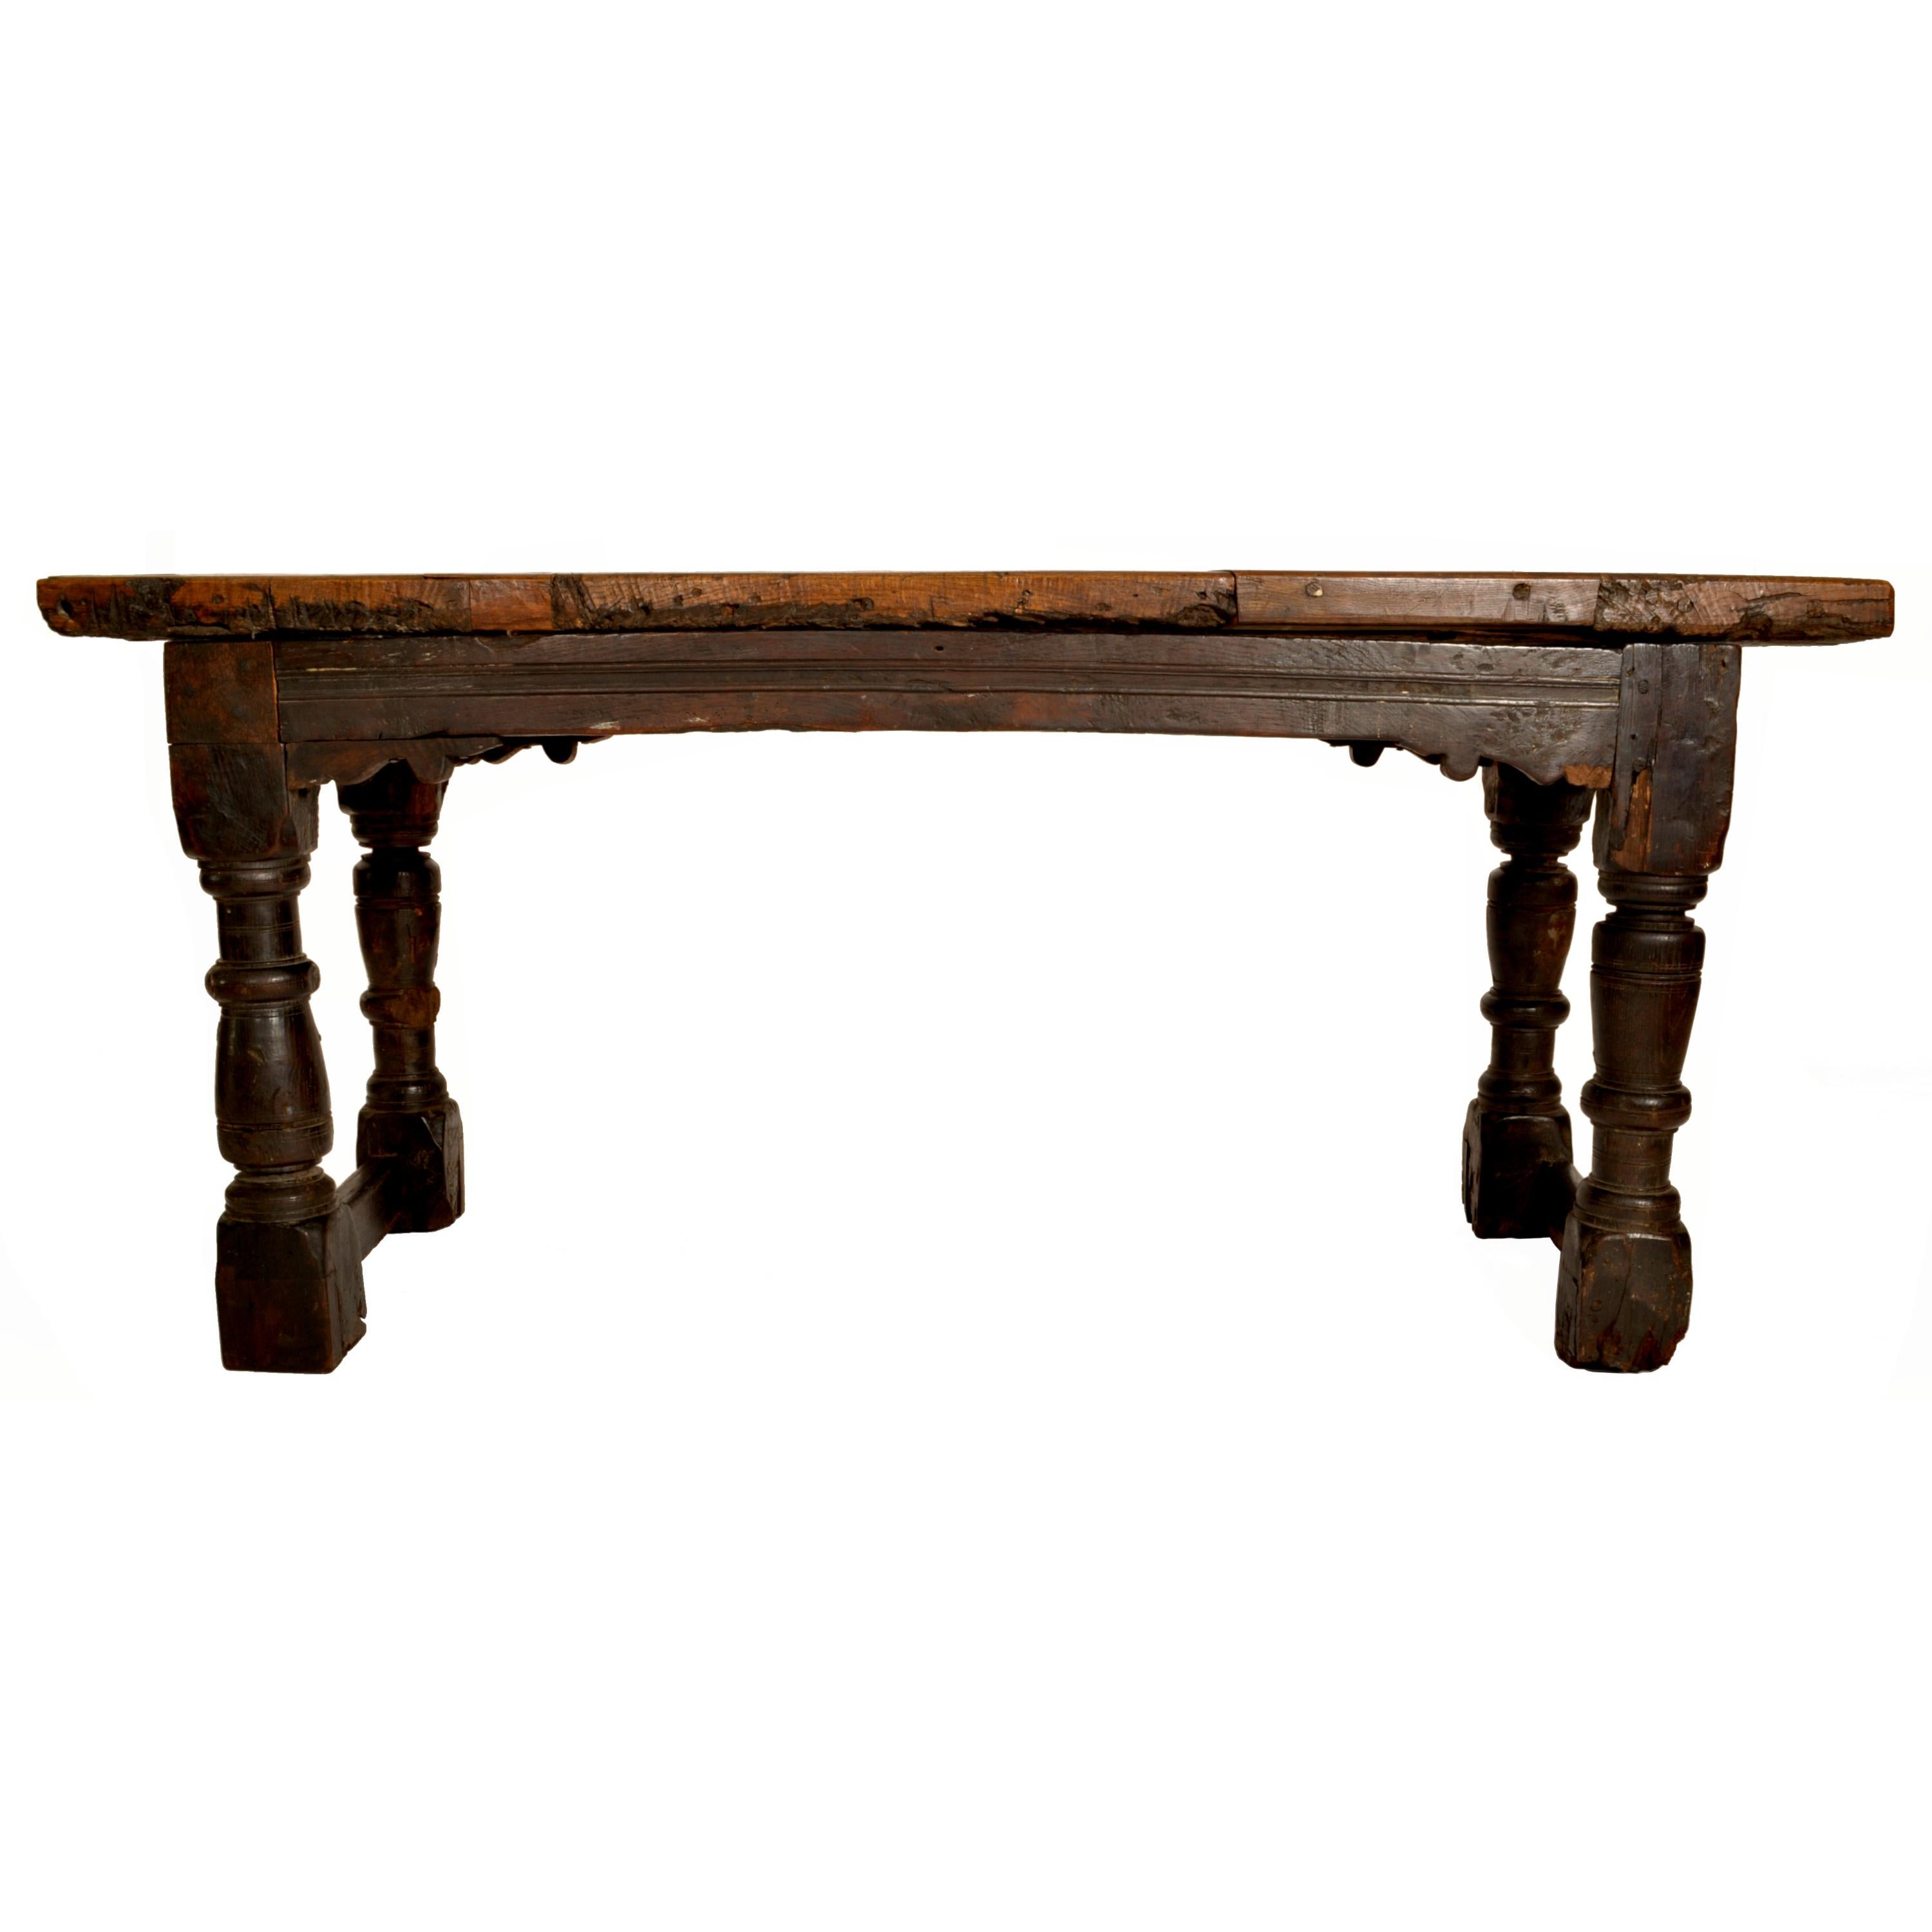 Antique 16th Century Elizabethan Tudor Carved Oak Dining Refectory Table, 1550 6